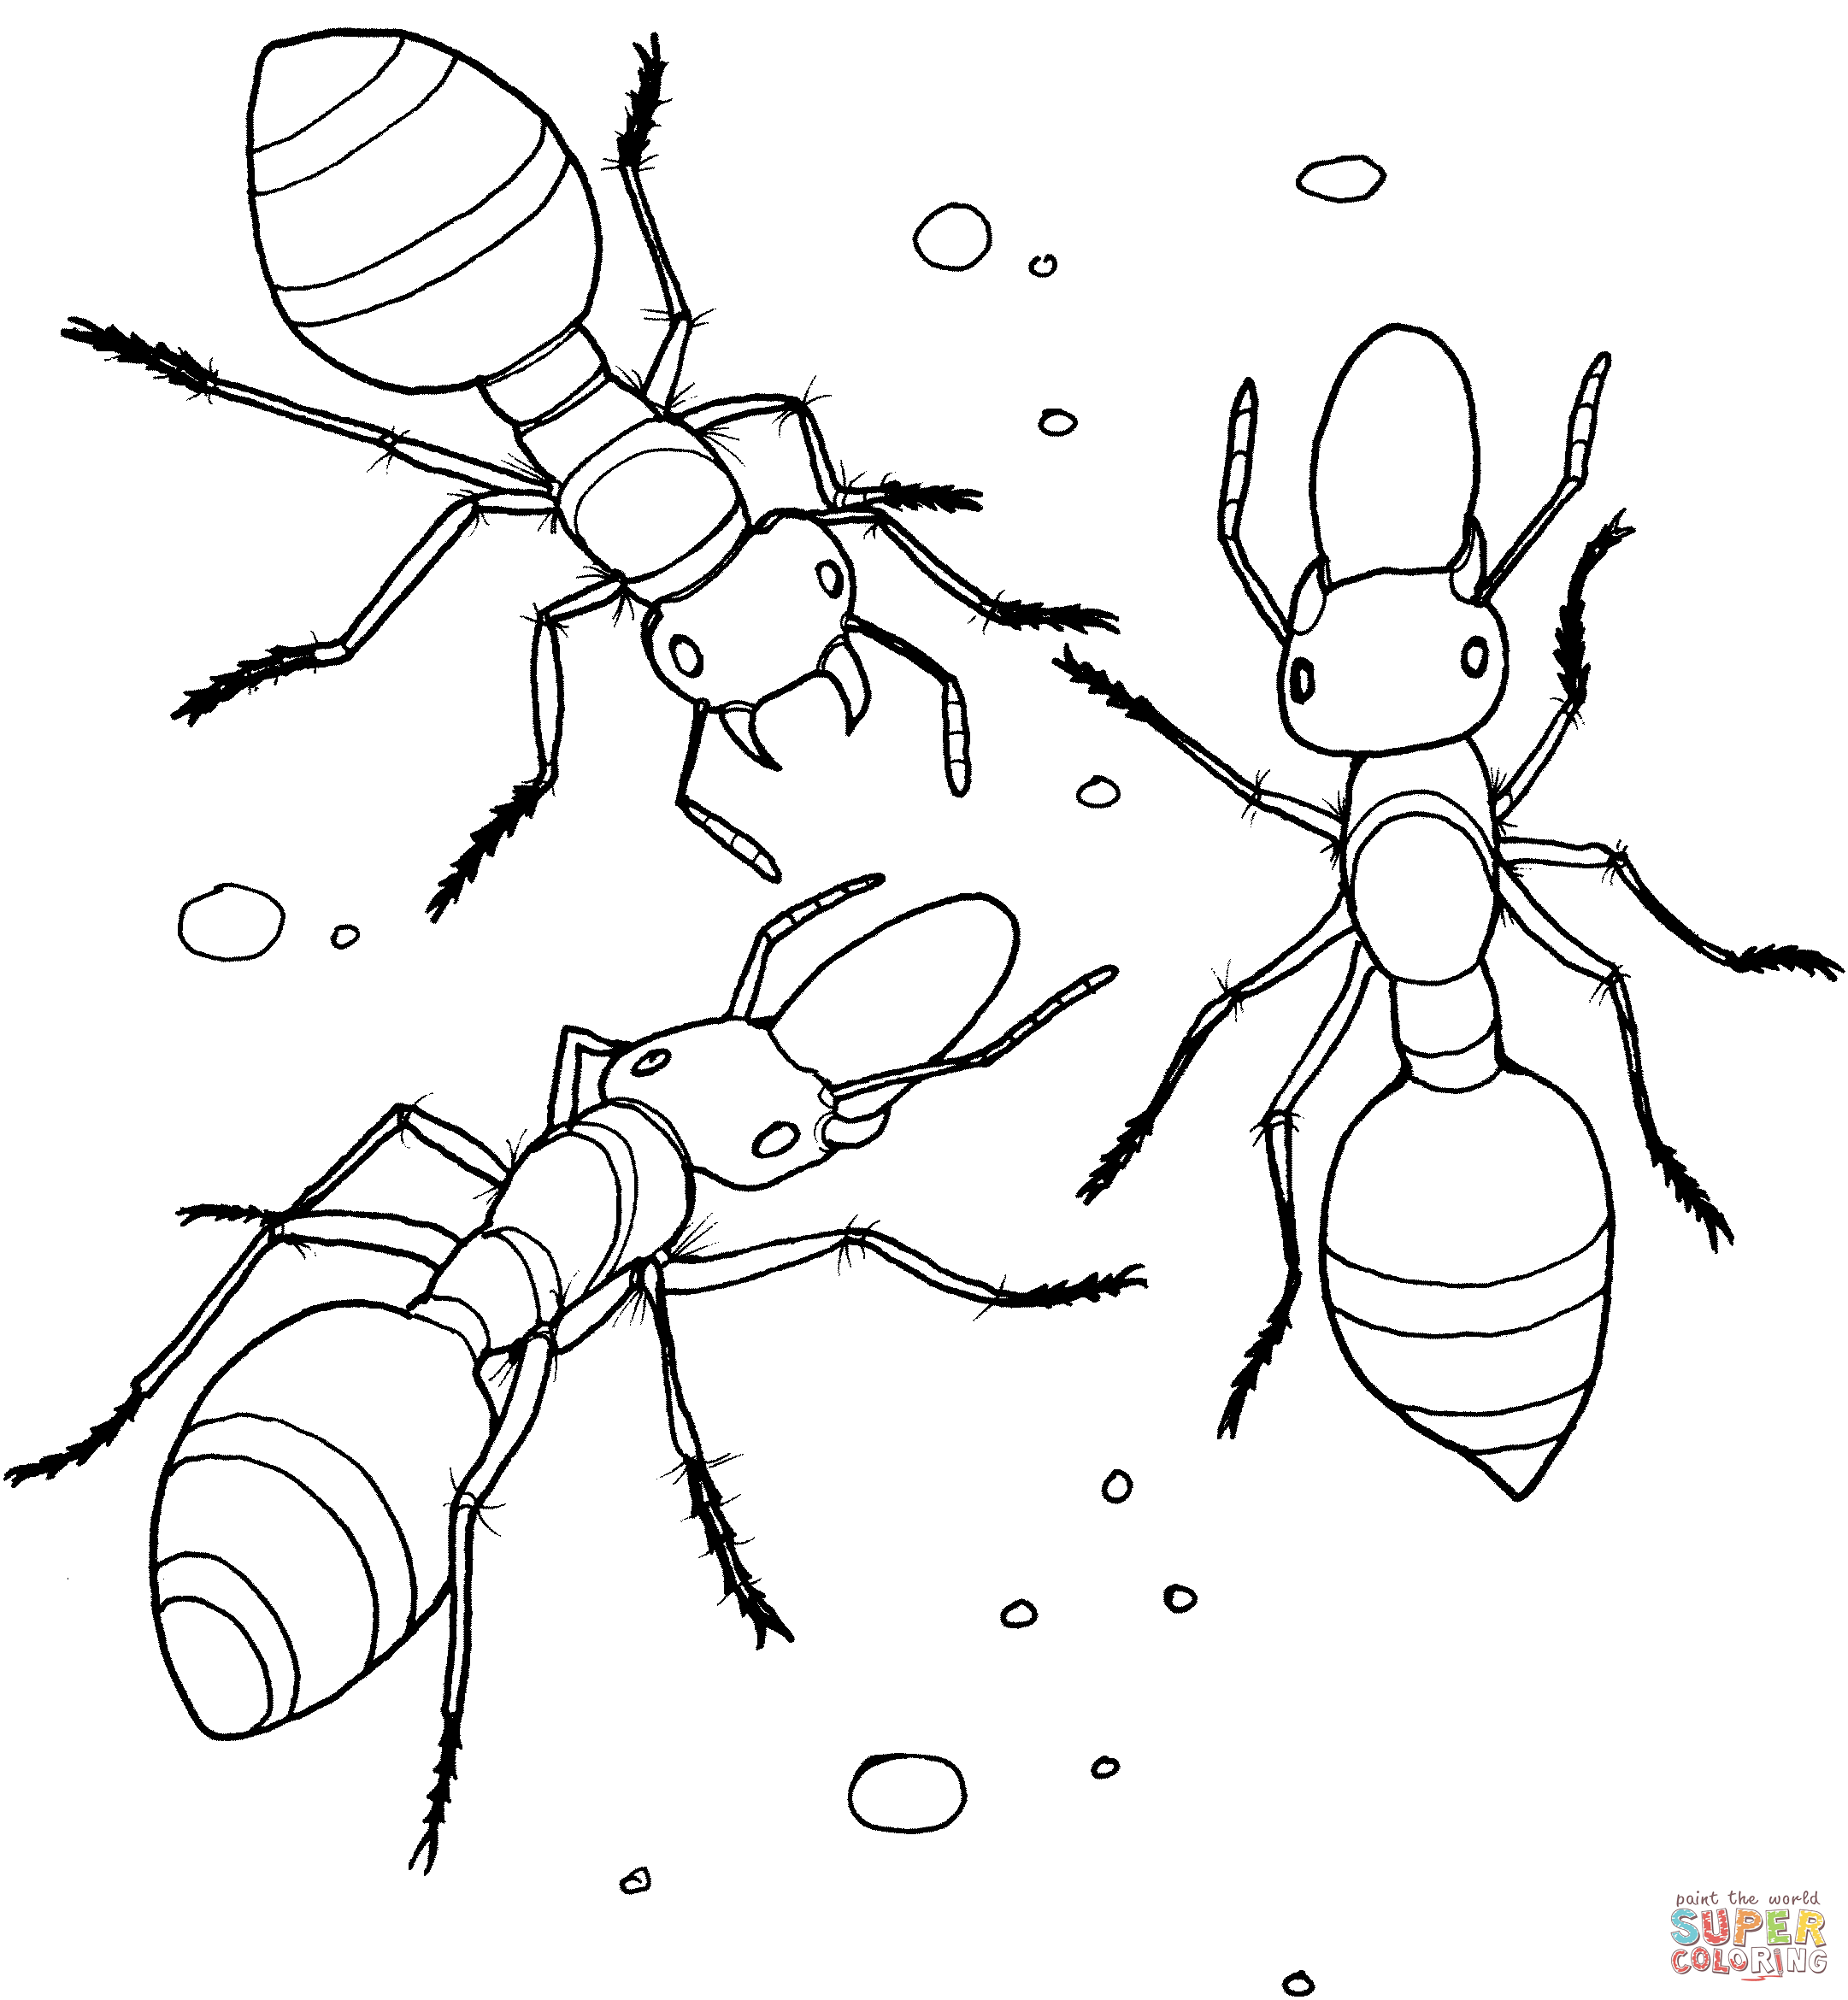 Ant coloring #20, Download drawings